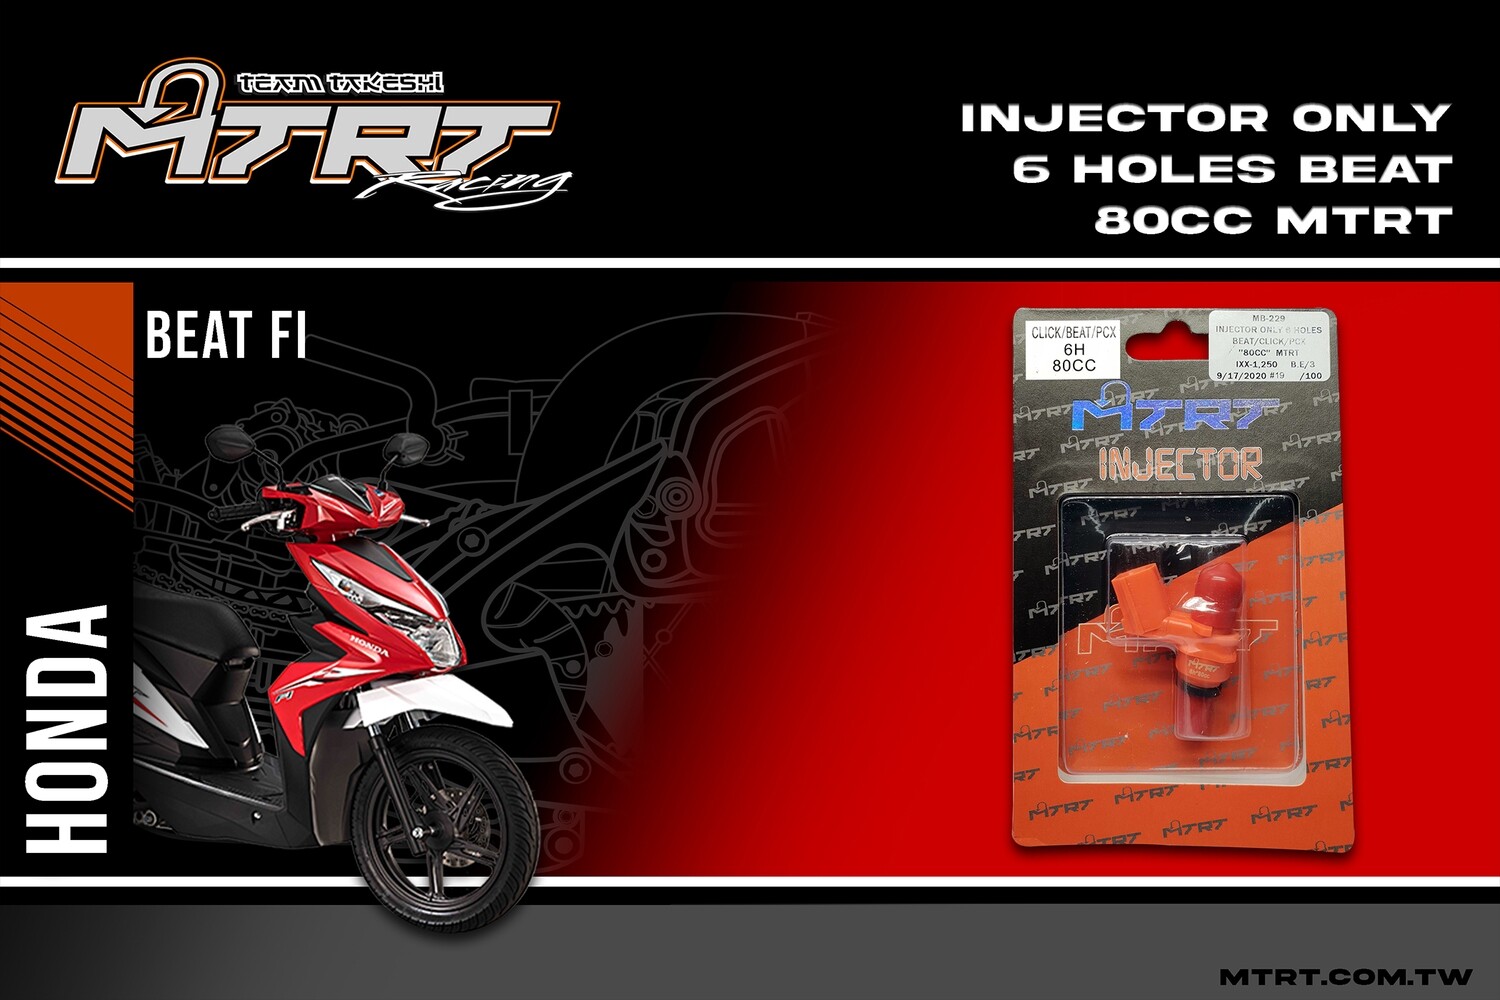 INJECTOR ONLY 6HOLES BEAT CLICK PCX 80CC MTRT